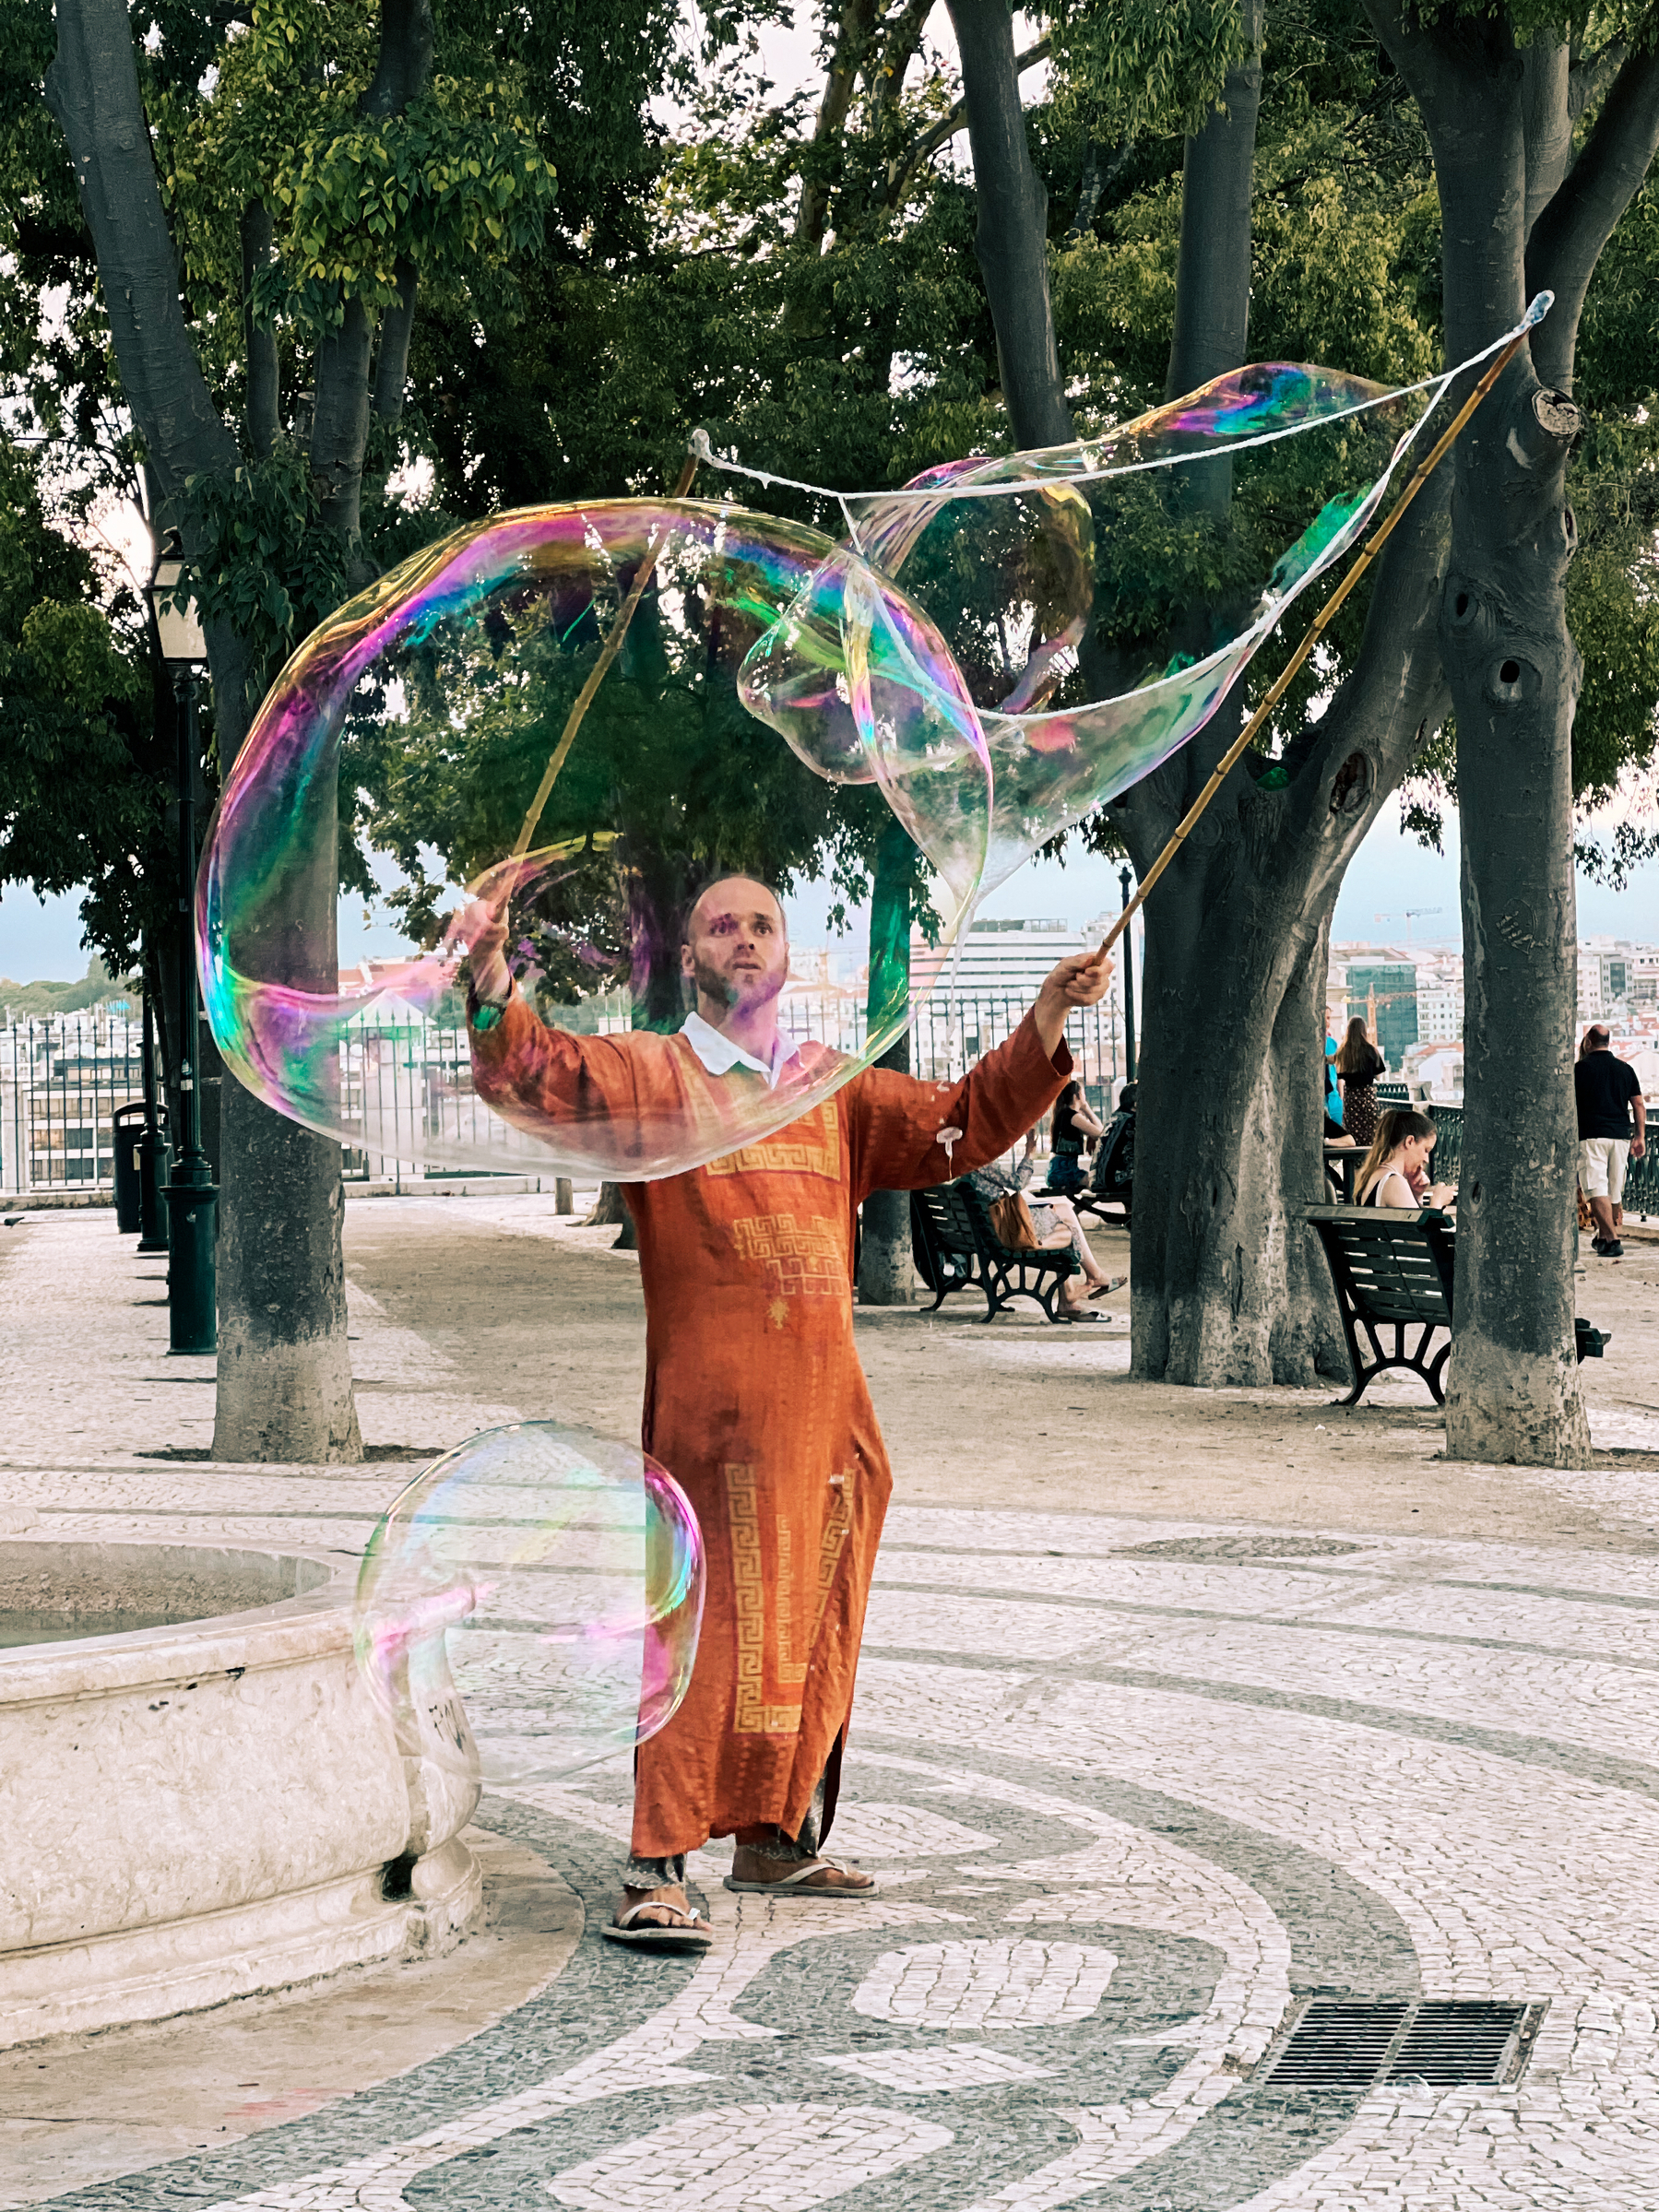 Street performer makes giant soap bubbles.￼